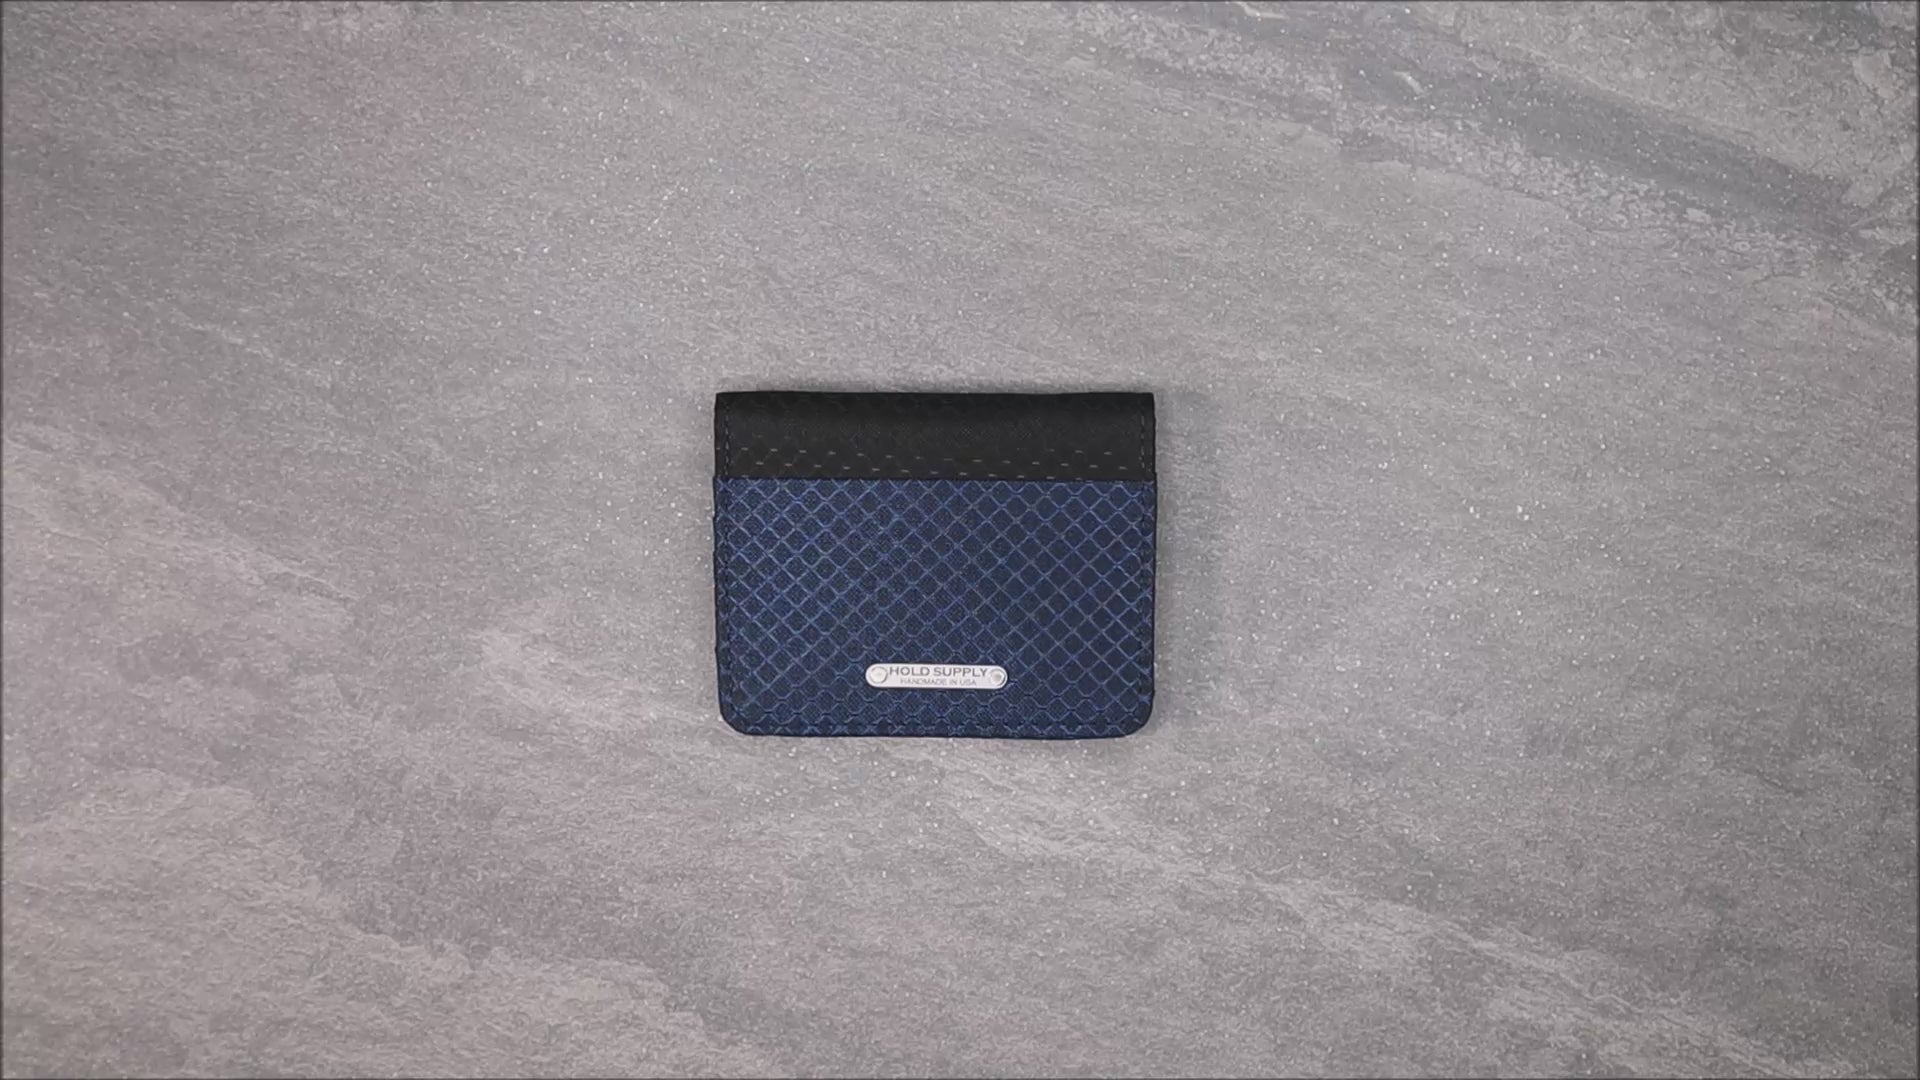 Navy Blue and Black Ripstop Vertical Bifold Wallet